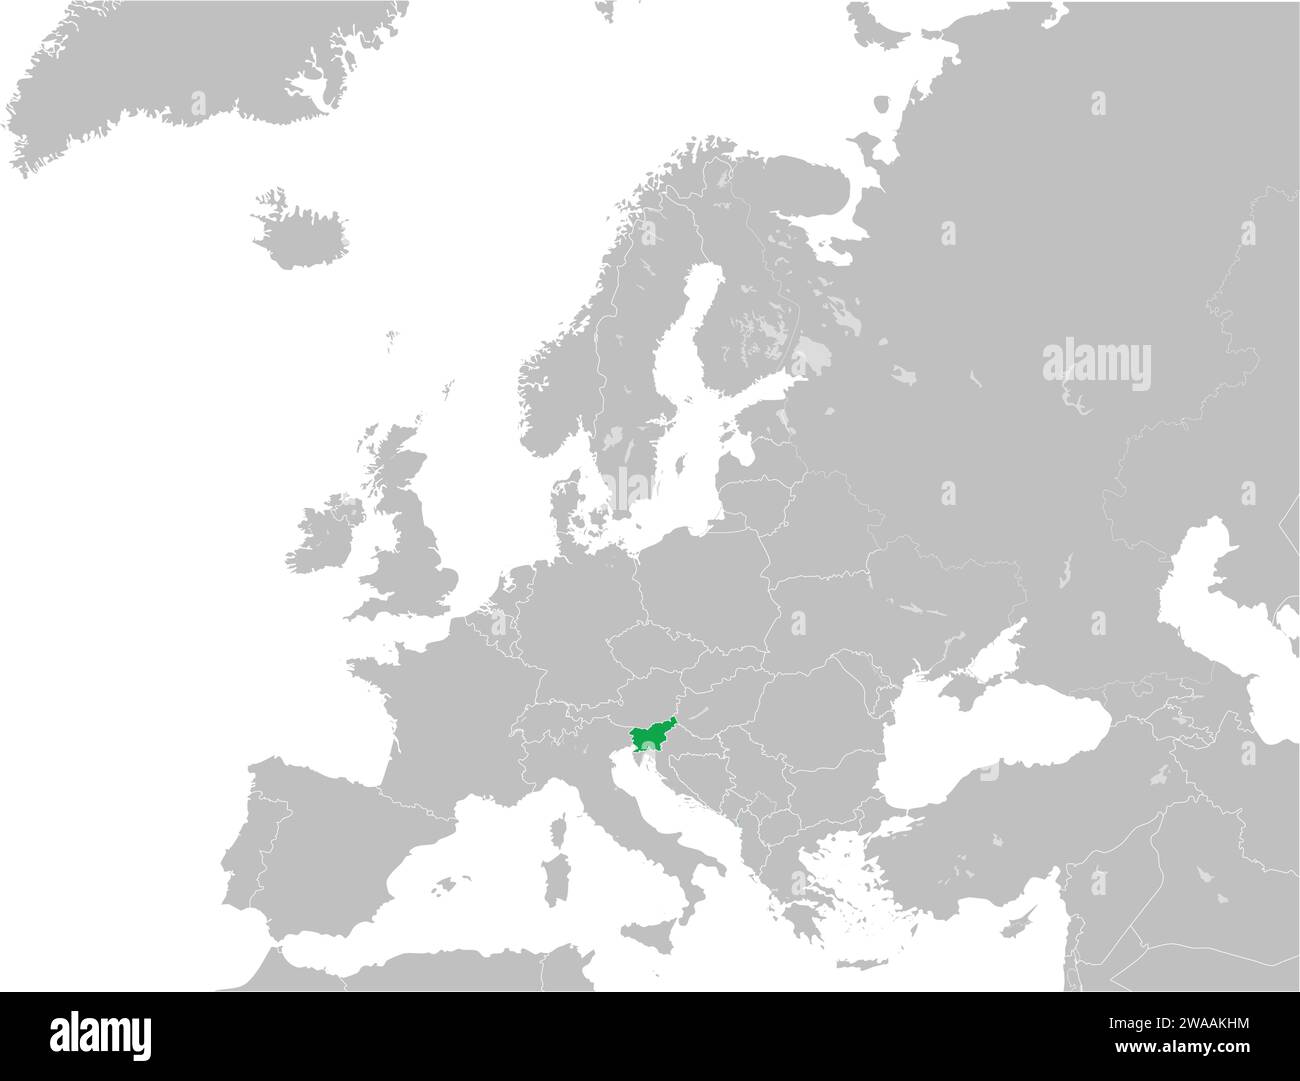 Location map of the REPUBLIC OF SLOVENIA, EUROPE Stock Vector